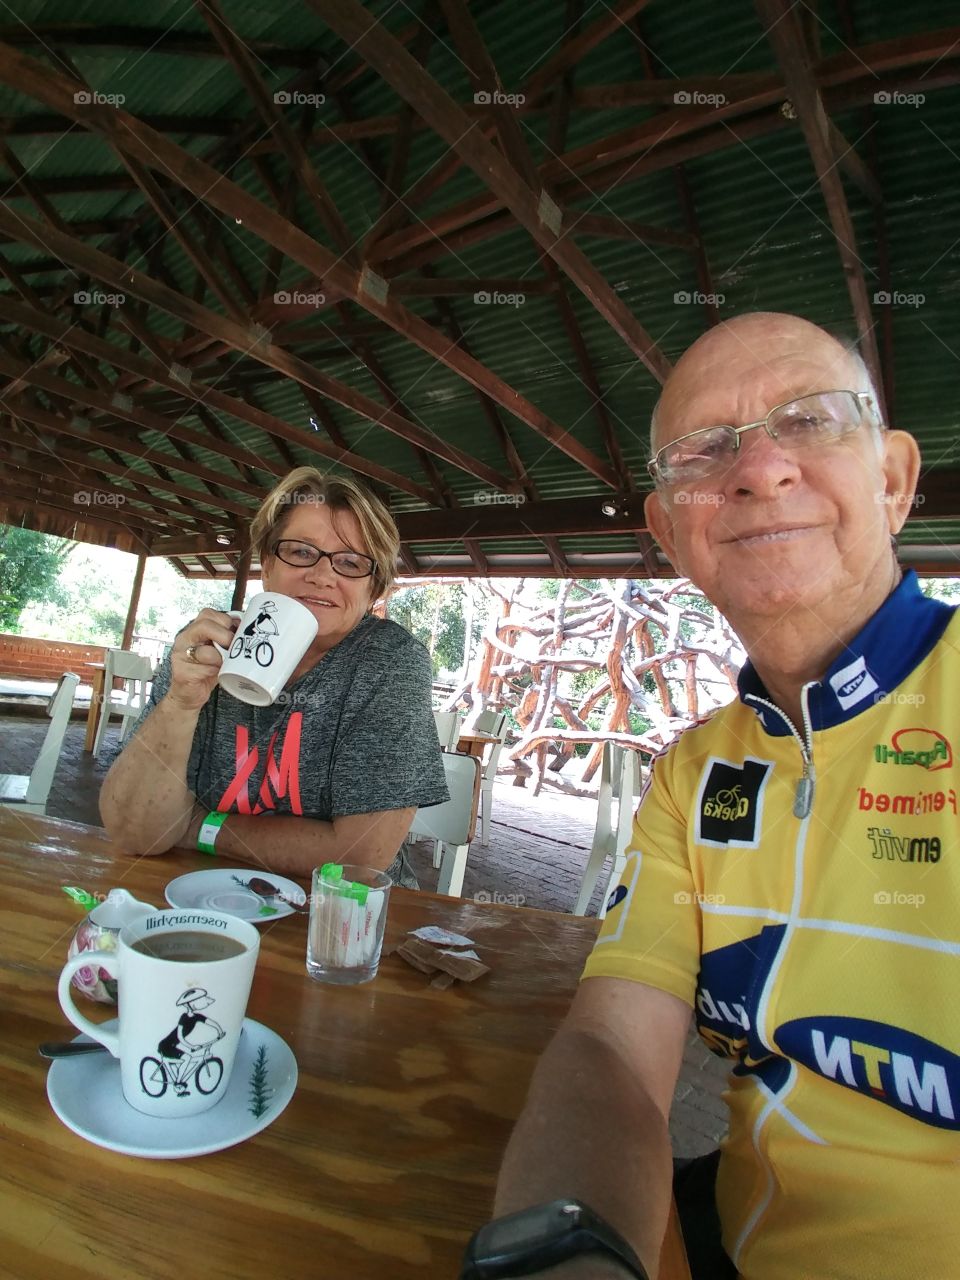 usaving coffee before a ride at a Mountain Bike Track. It makes us happy to cycle together because: we love to cycle, it takes our minds off  normal routine, we love being outdoors enjoying the clean air and nature, it keeps us young, healthy and fit